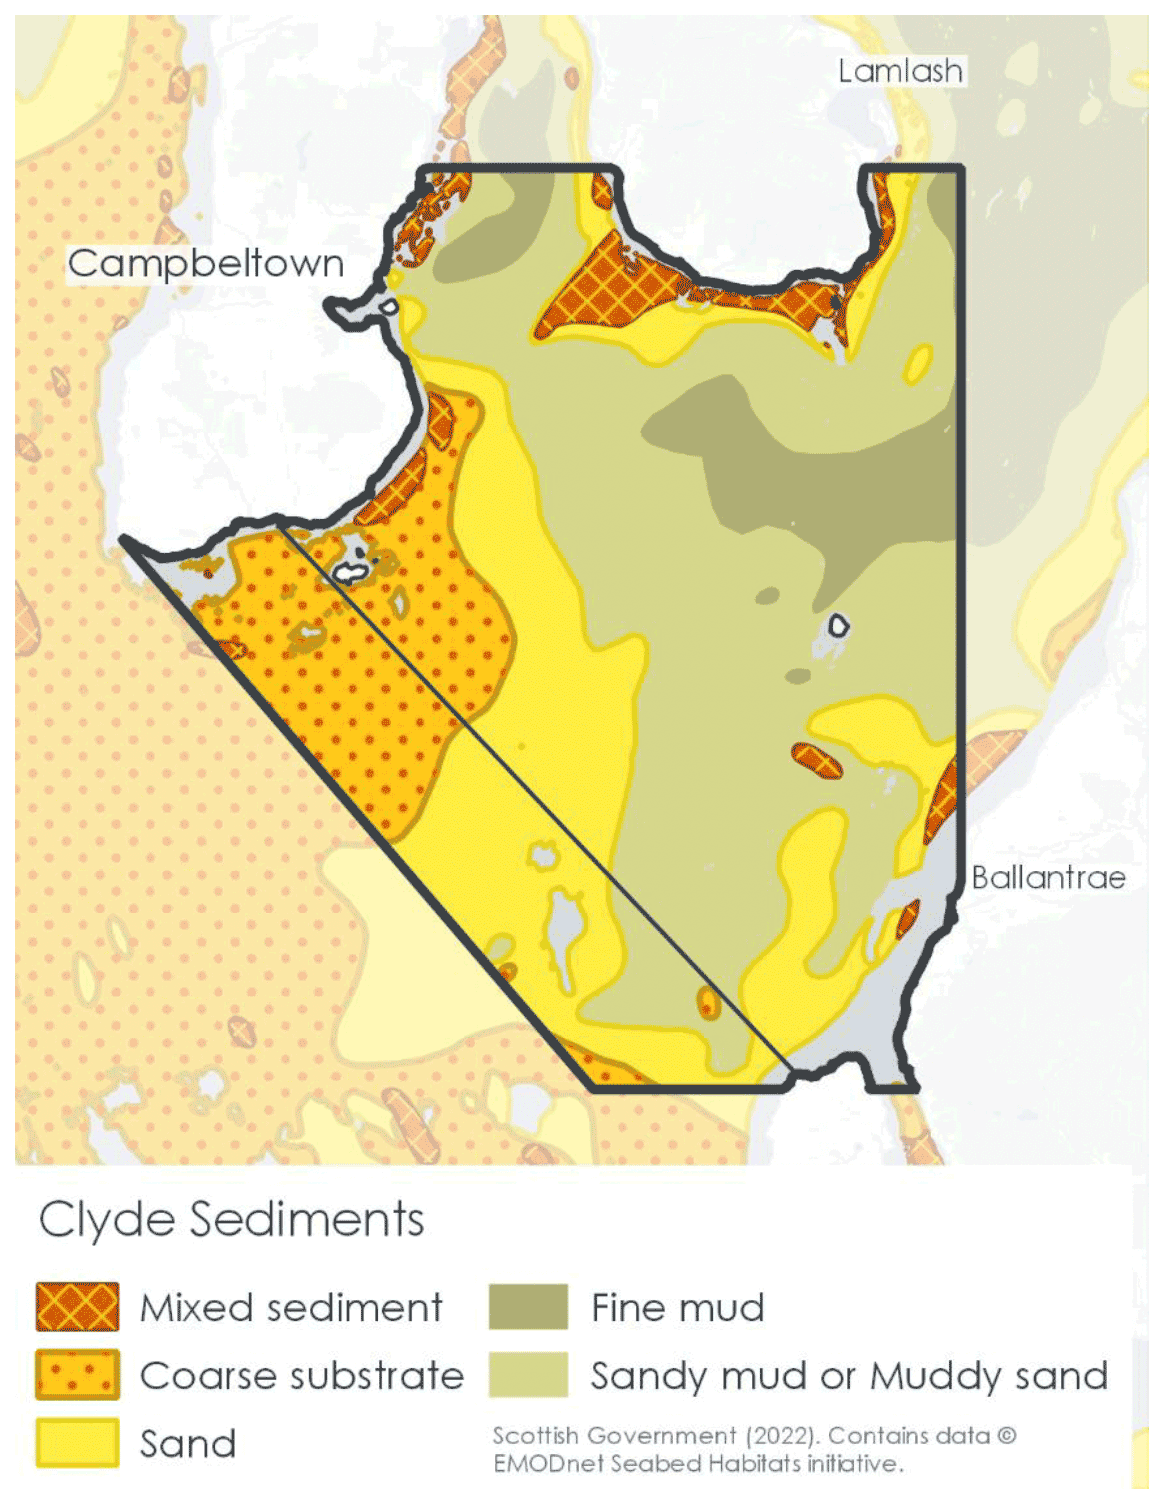 representation of sediment distribution in the 2002-2021 Clyde Cod Box area. The different types of sediment include mixed sediment (close to Arran and other inshore areas), coarse substrate (close to Kintyre), sand, fine mud and sandy mud/muddy sand.